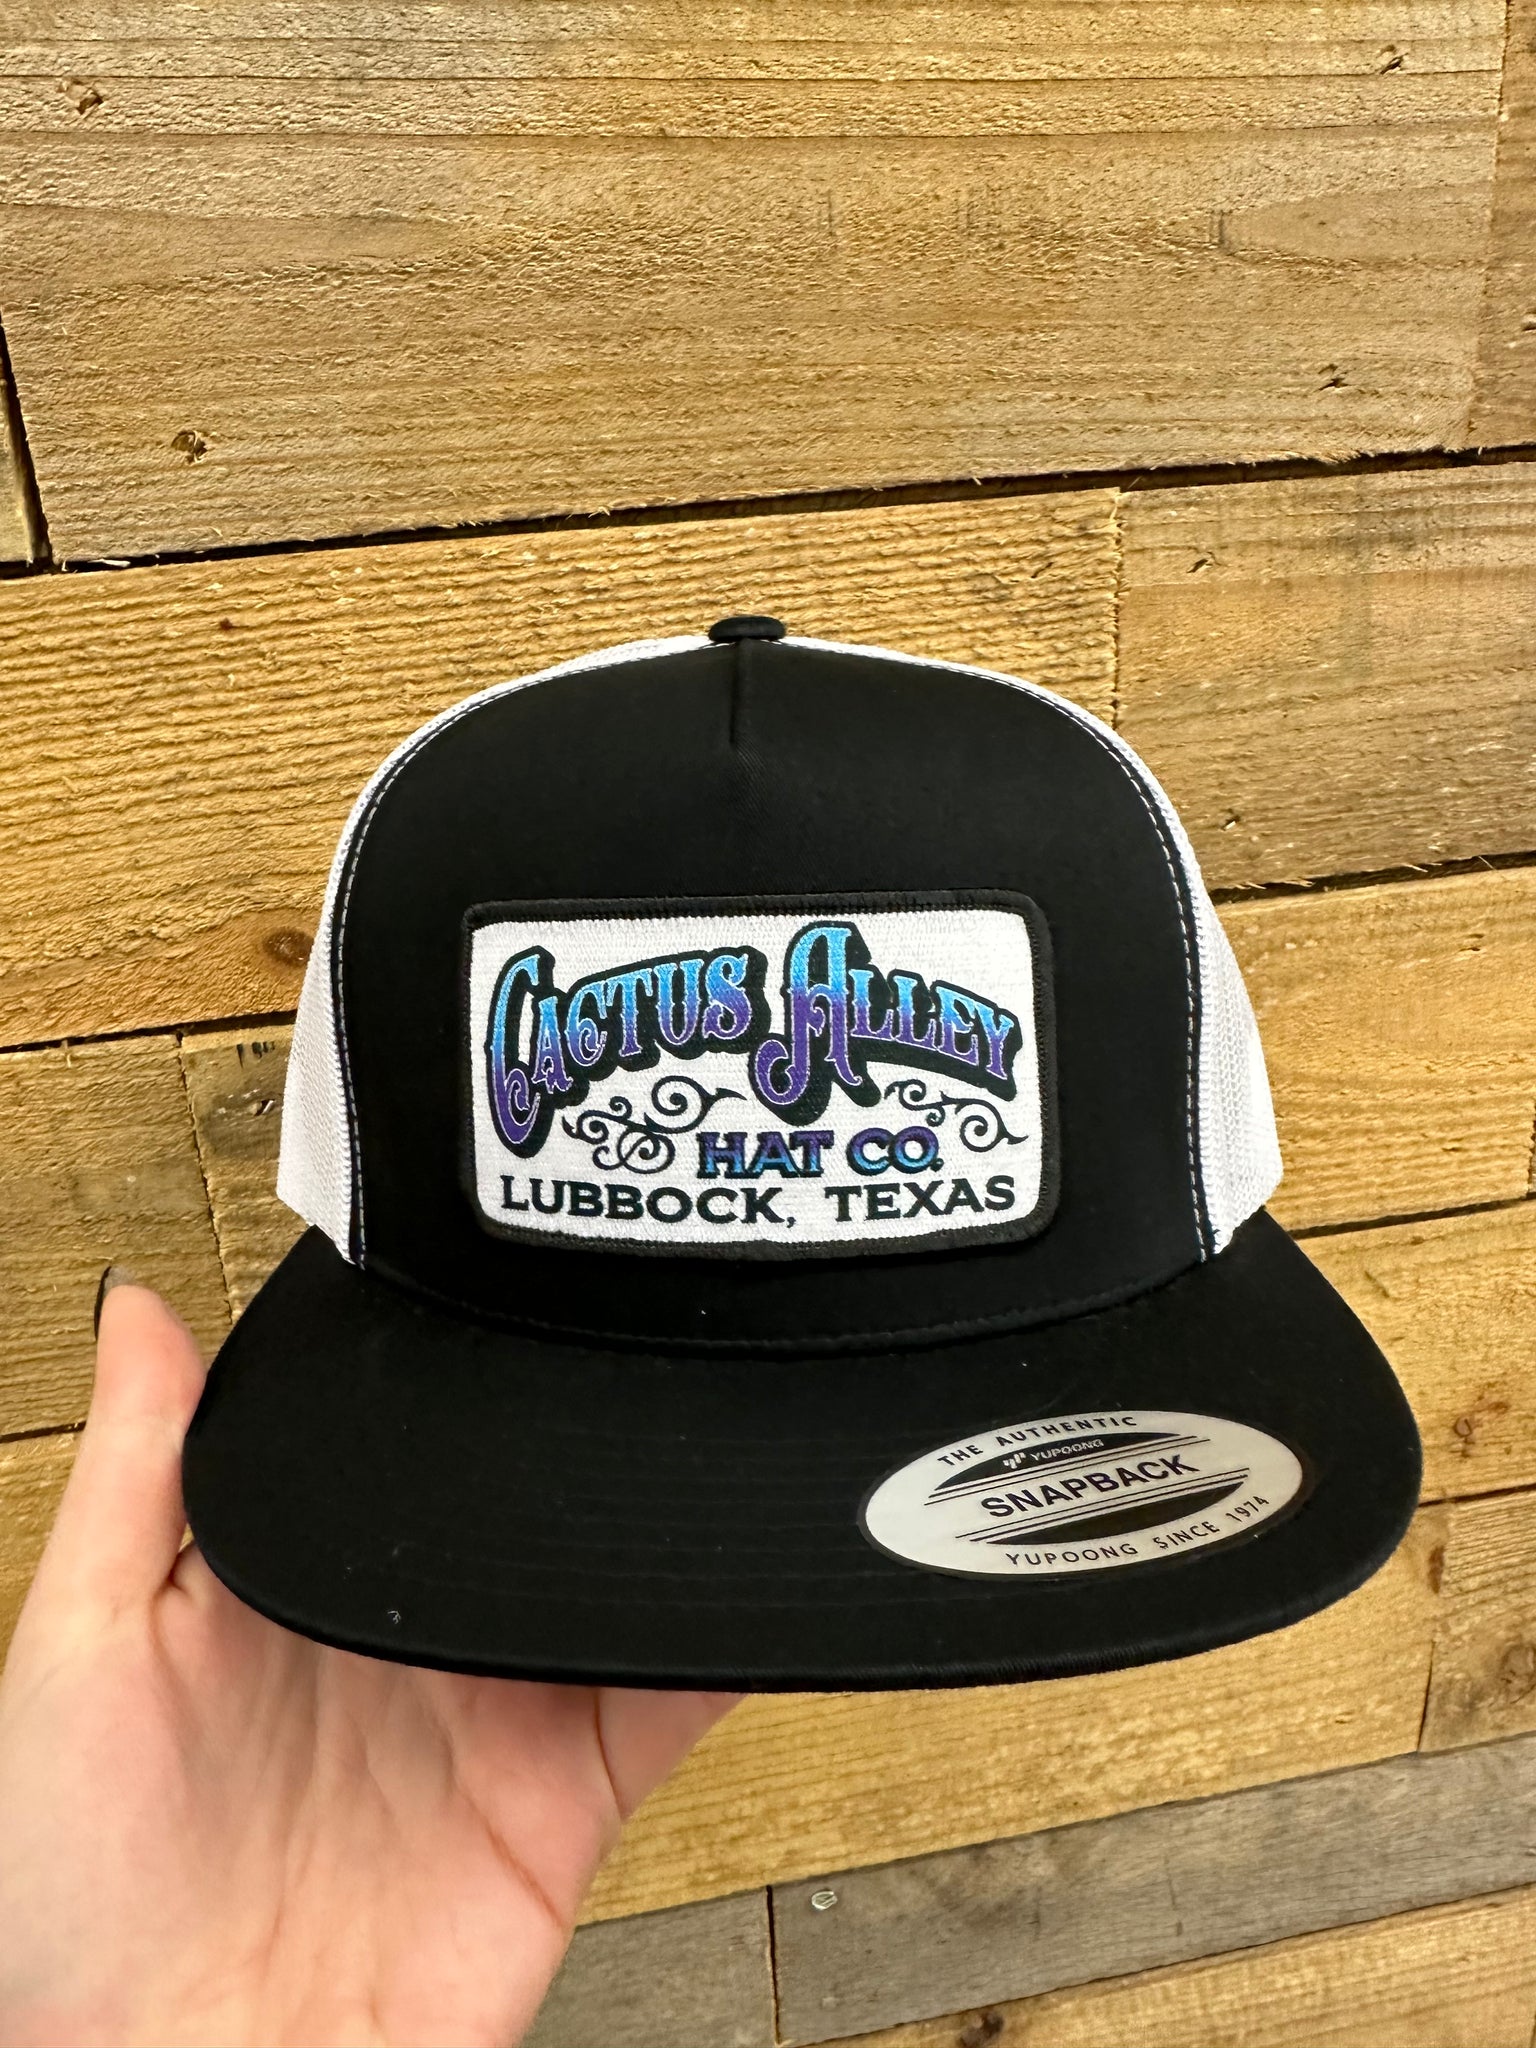 Outlaw Cactus Alley Hat Co